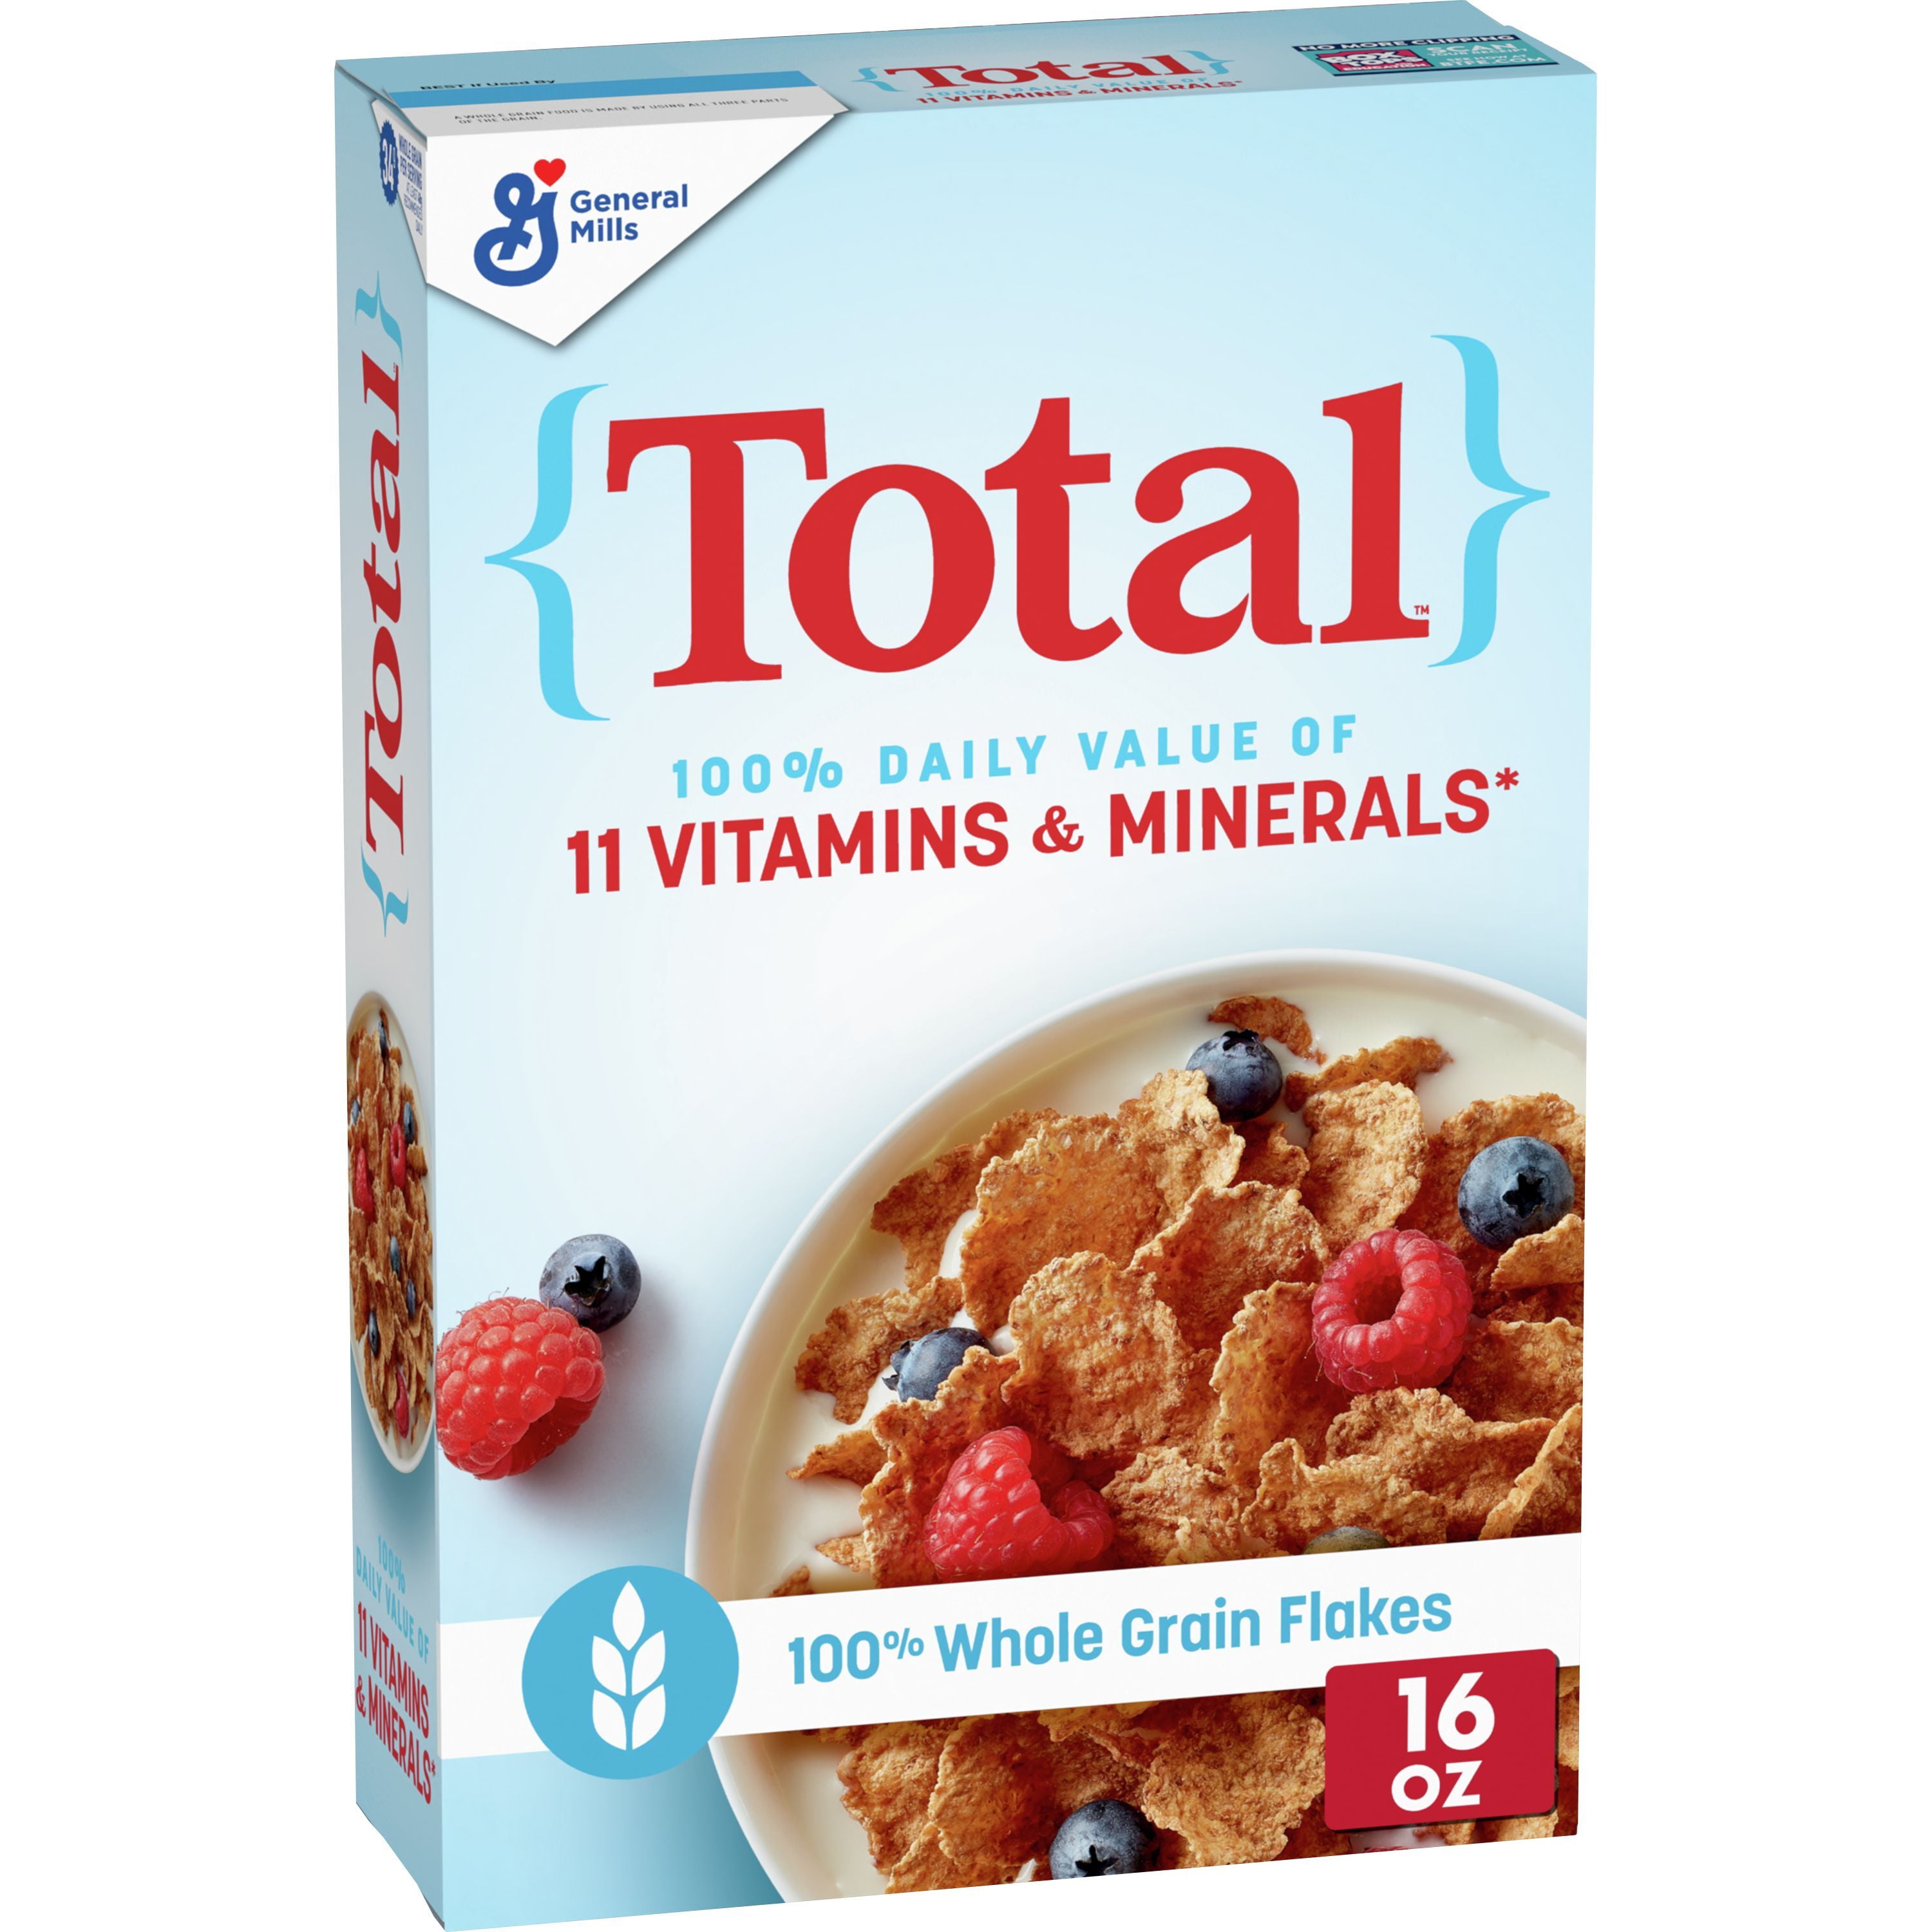 Total Breakfast Cereal, 100% Daily Value of 11 Vitamins, Whole Grain Flakes, 16 oz